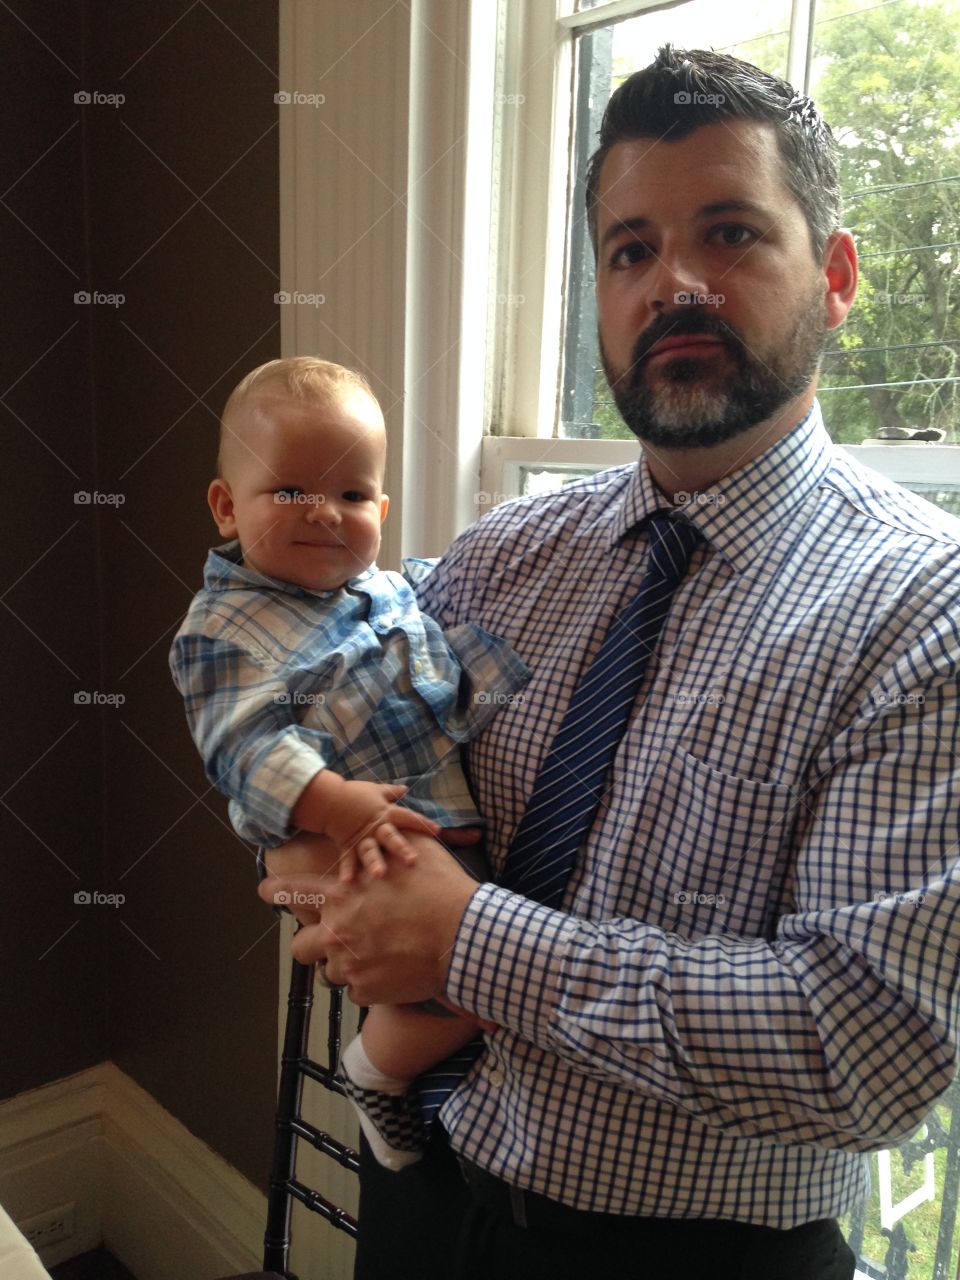 Beard man in formal wear holding son at home